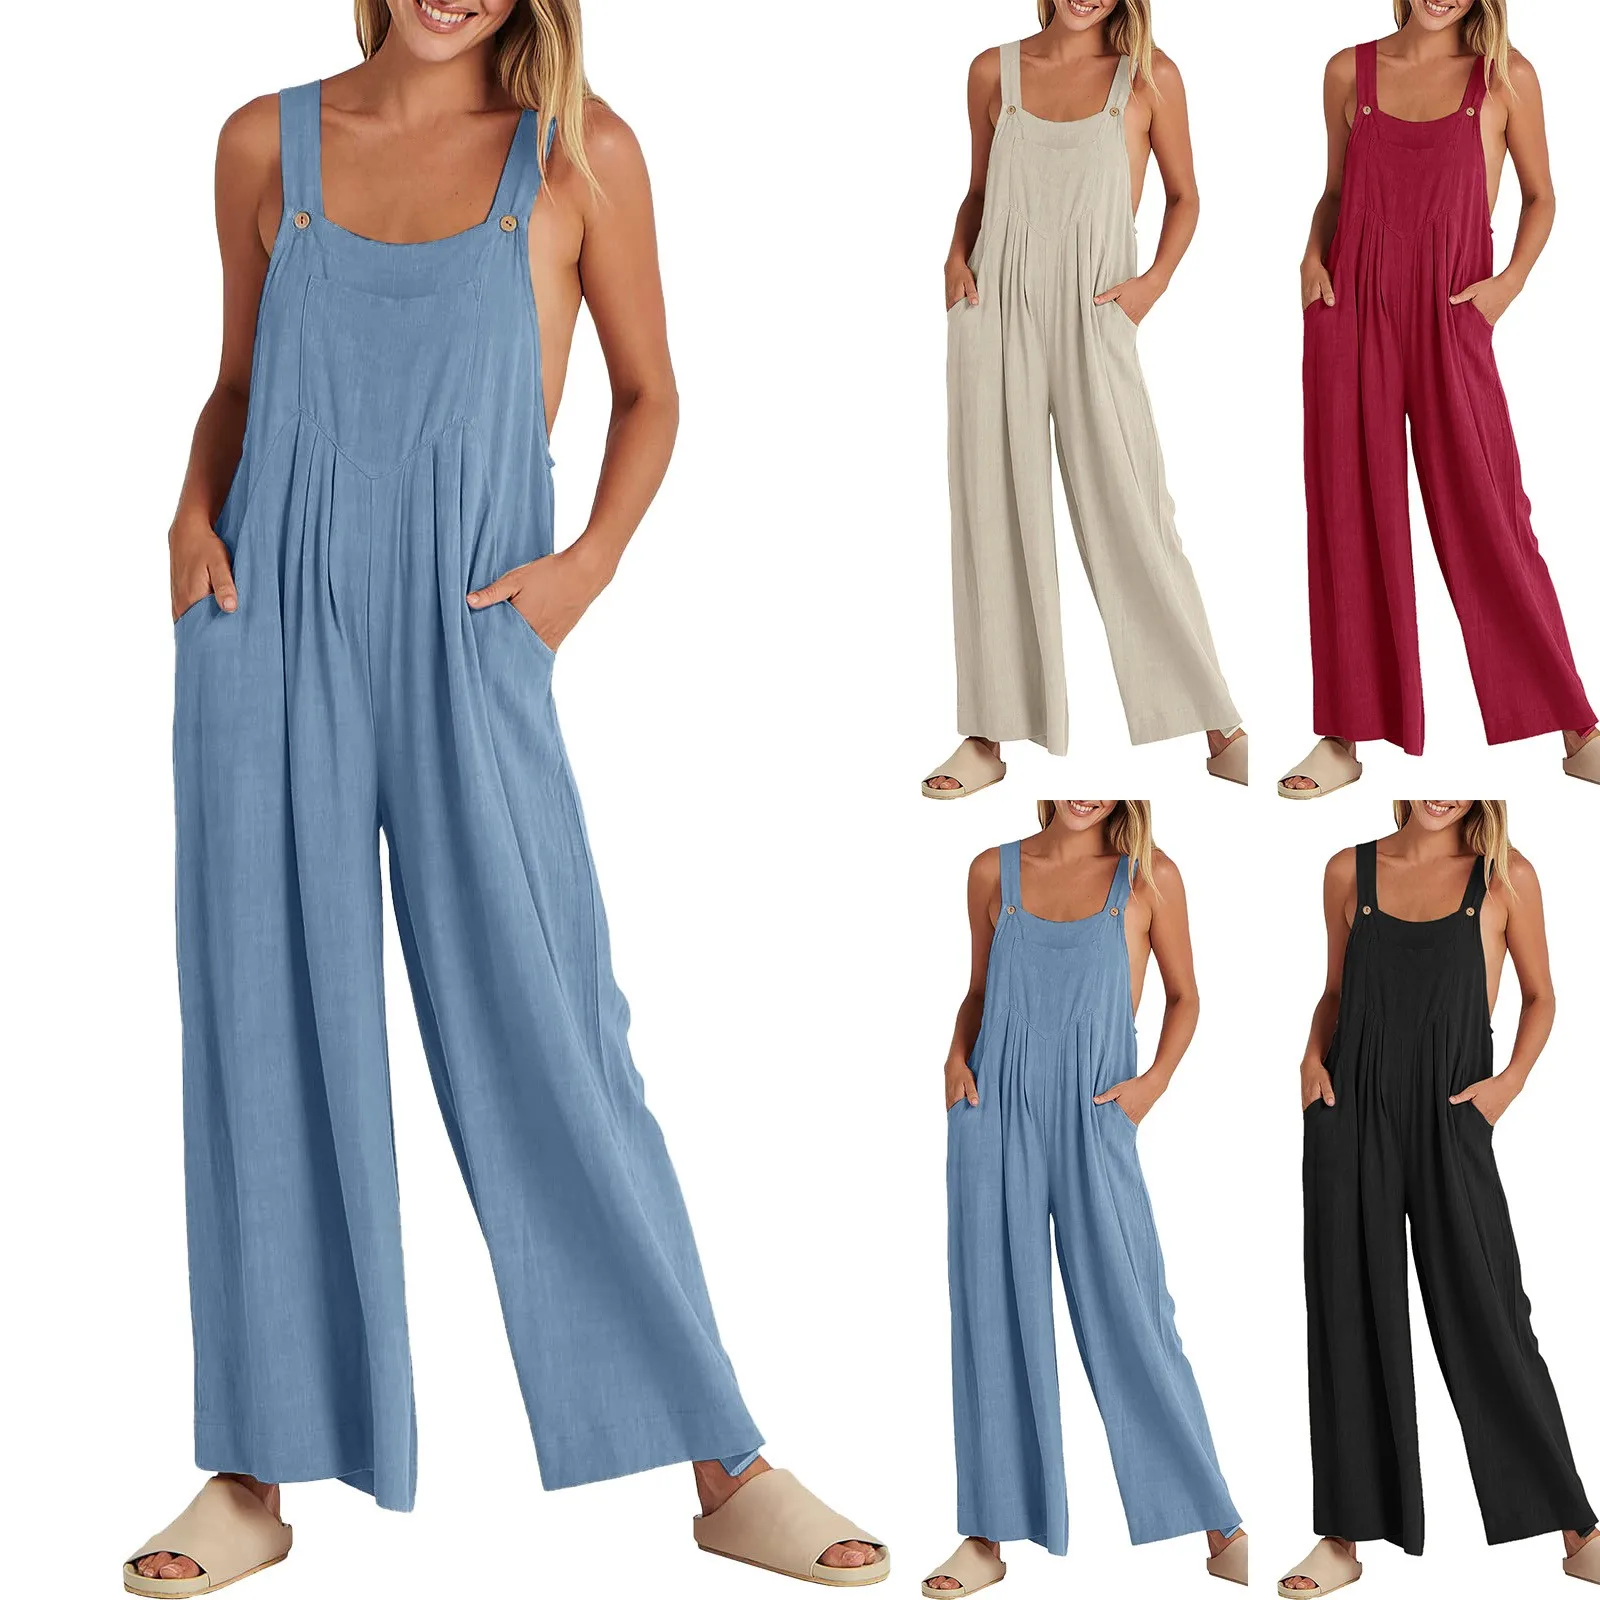 

Woman Casual Jumpsuit Women Casual Loose Long Bib Pants Wide Leg Jumpsuits Baggy Rompers Overalls With Pockets Combinaison